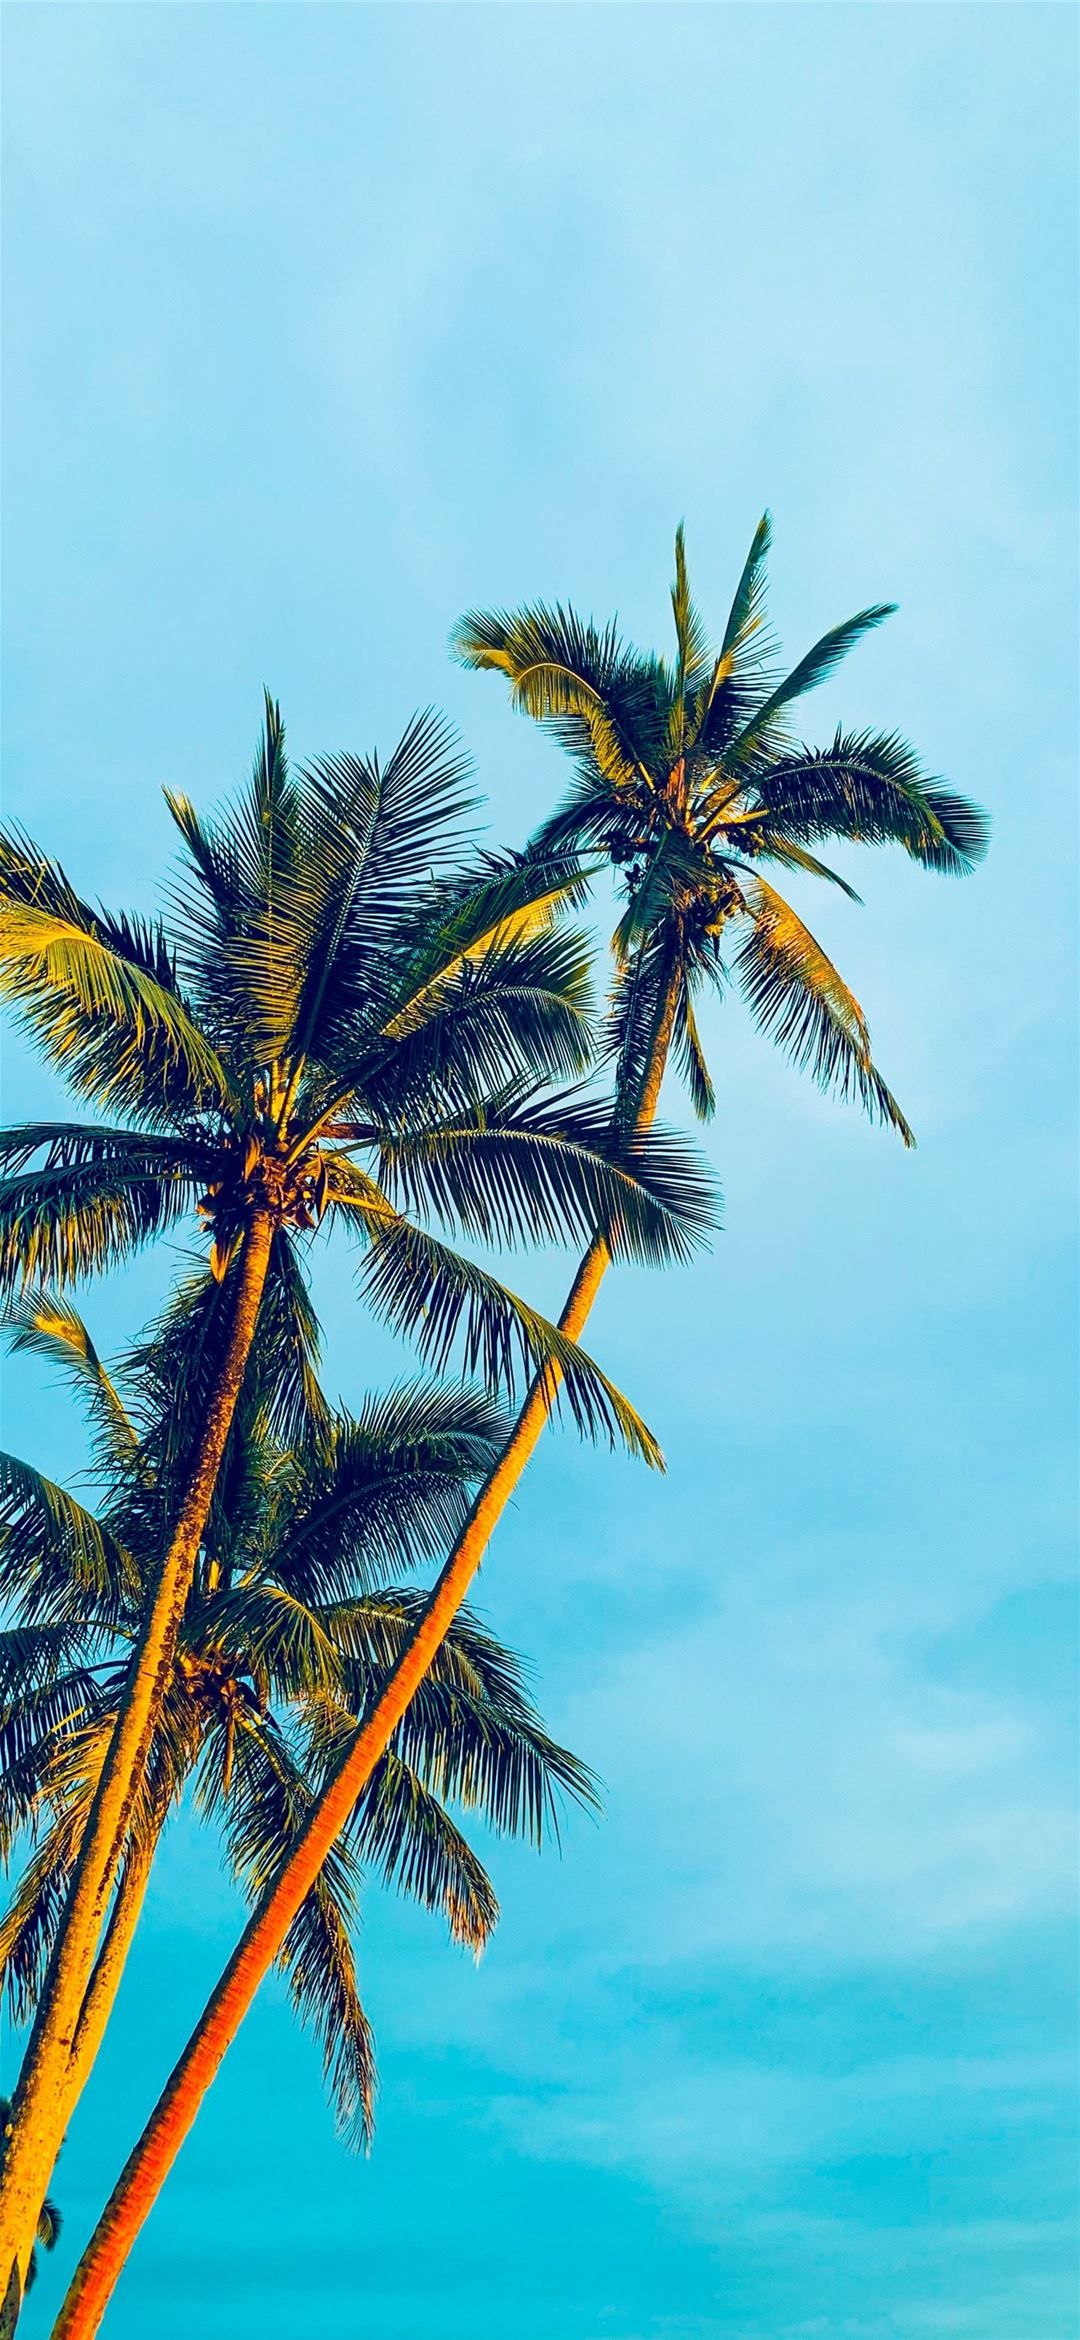 coconut trees under blue sky during daytime iPhone 12 Wallpaper Free Download